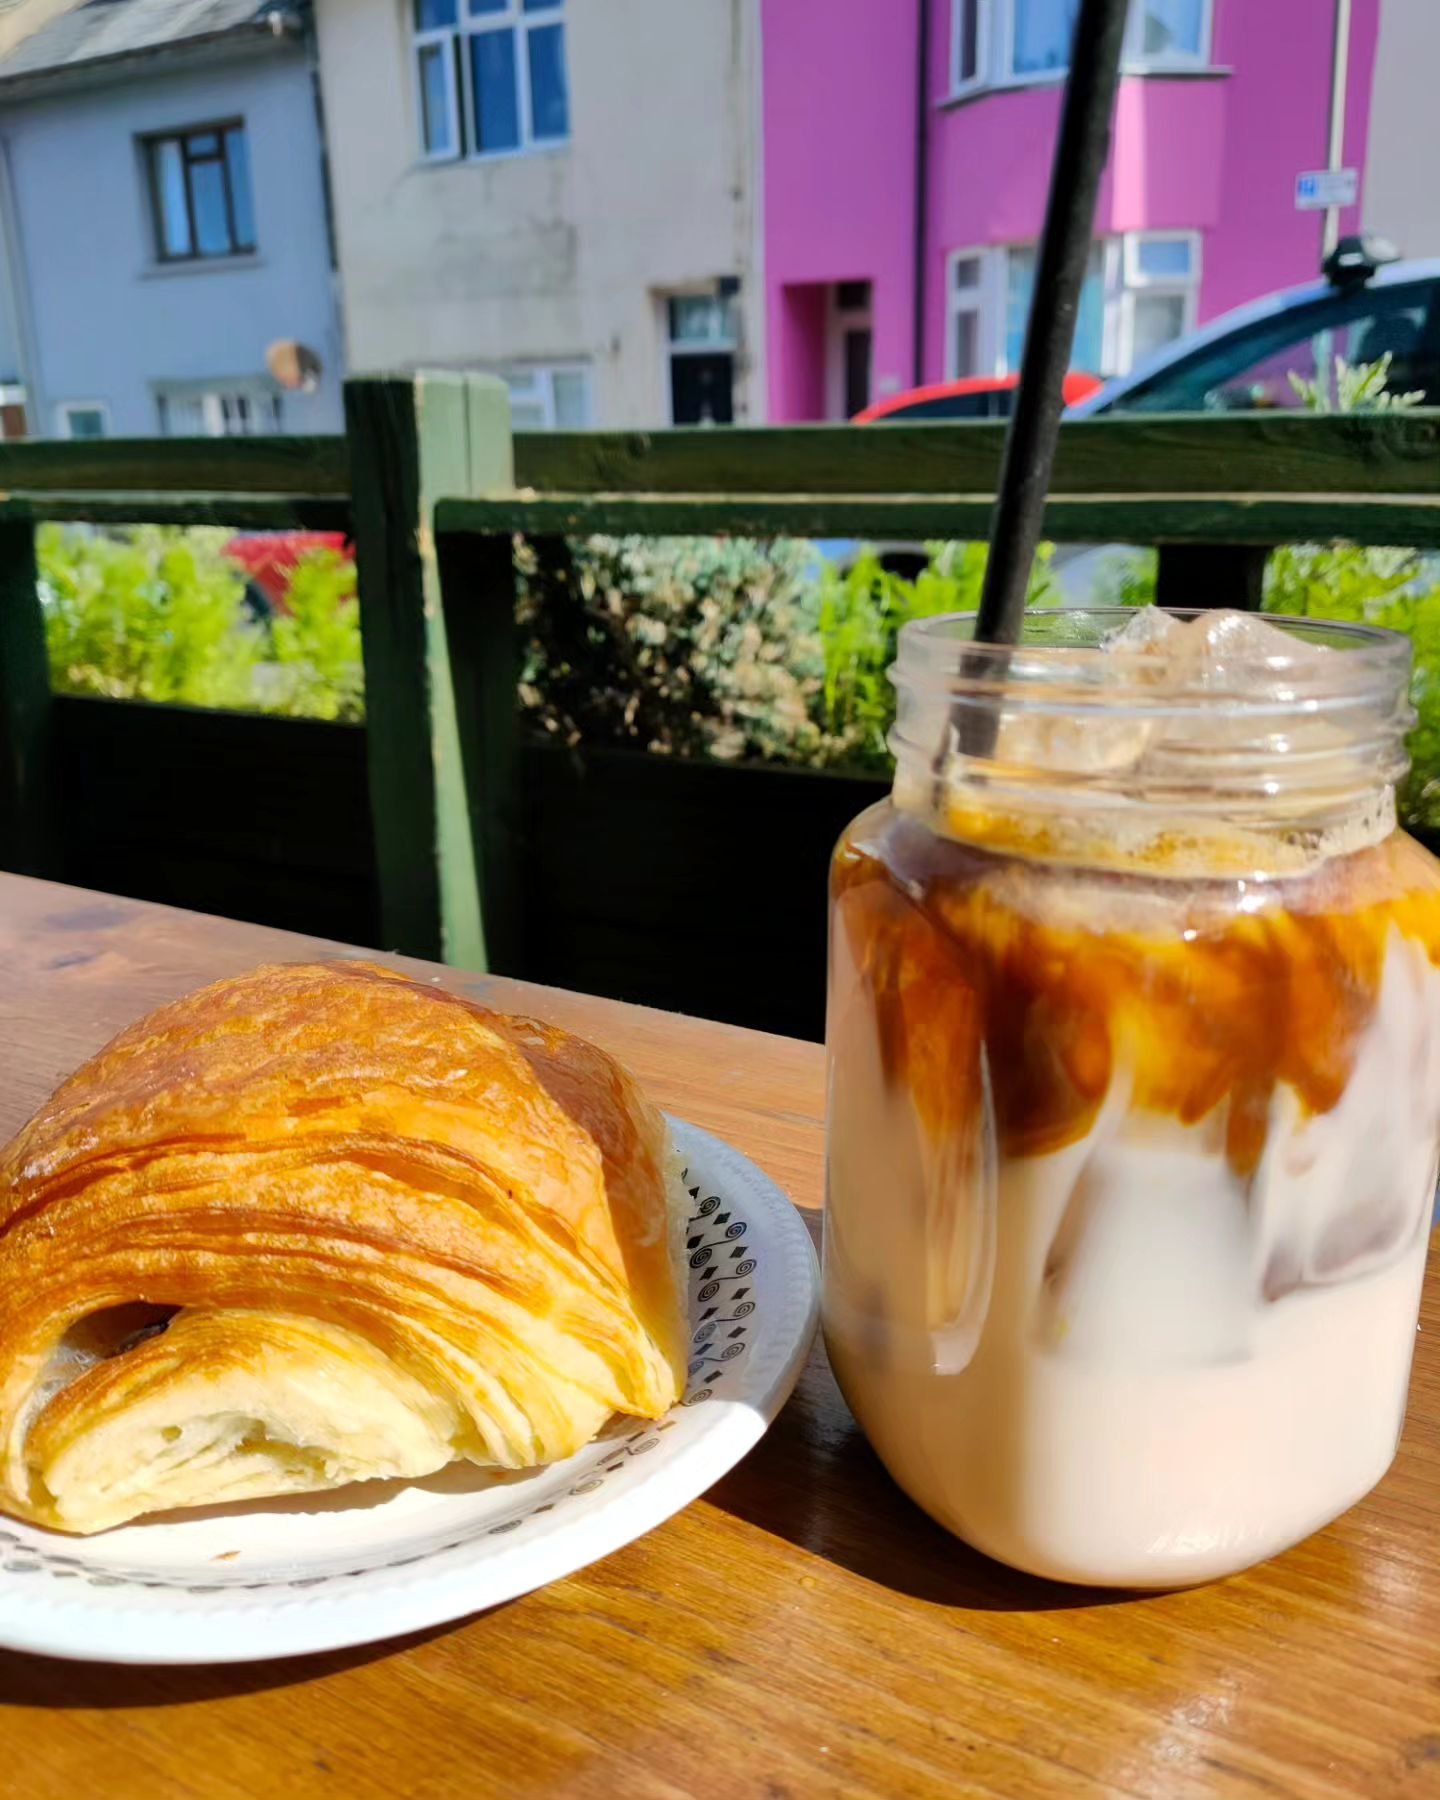 Iced coffee and a @real_patisserie pastry is always a winning combo, make the most of our outdoor seating if the weather holds out ☀️ 

We have a large selection of coffees, teas and pastries to have here or take away

Have a great week Hanover! 💛
.